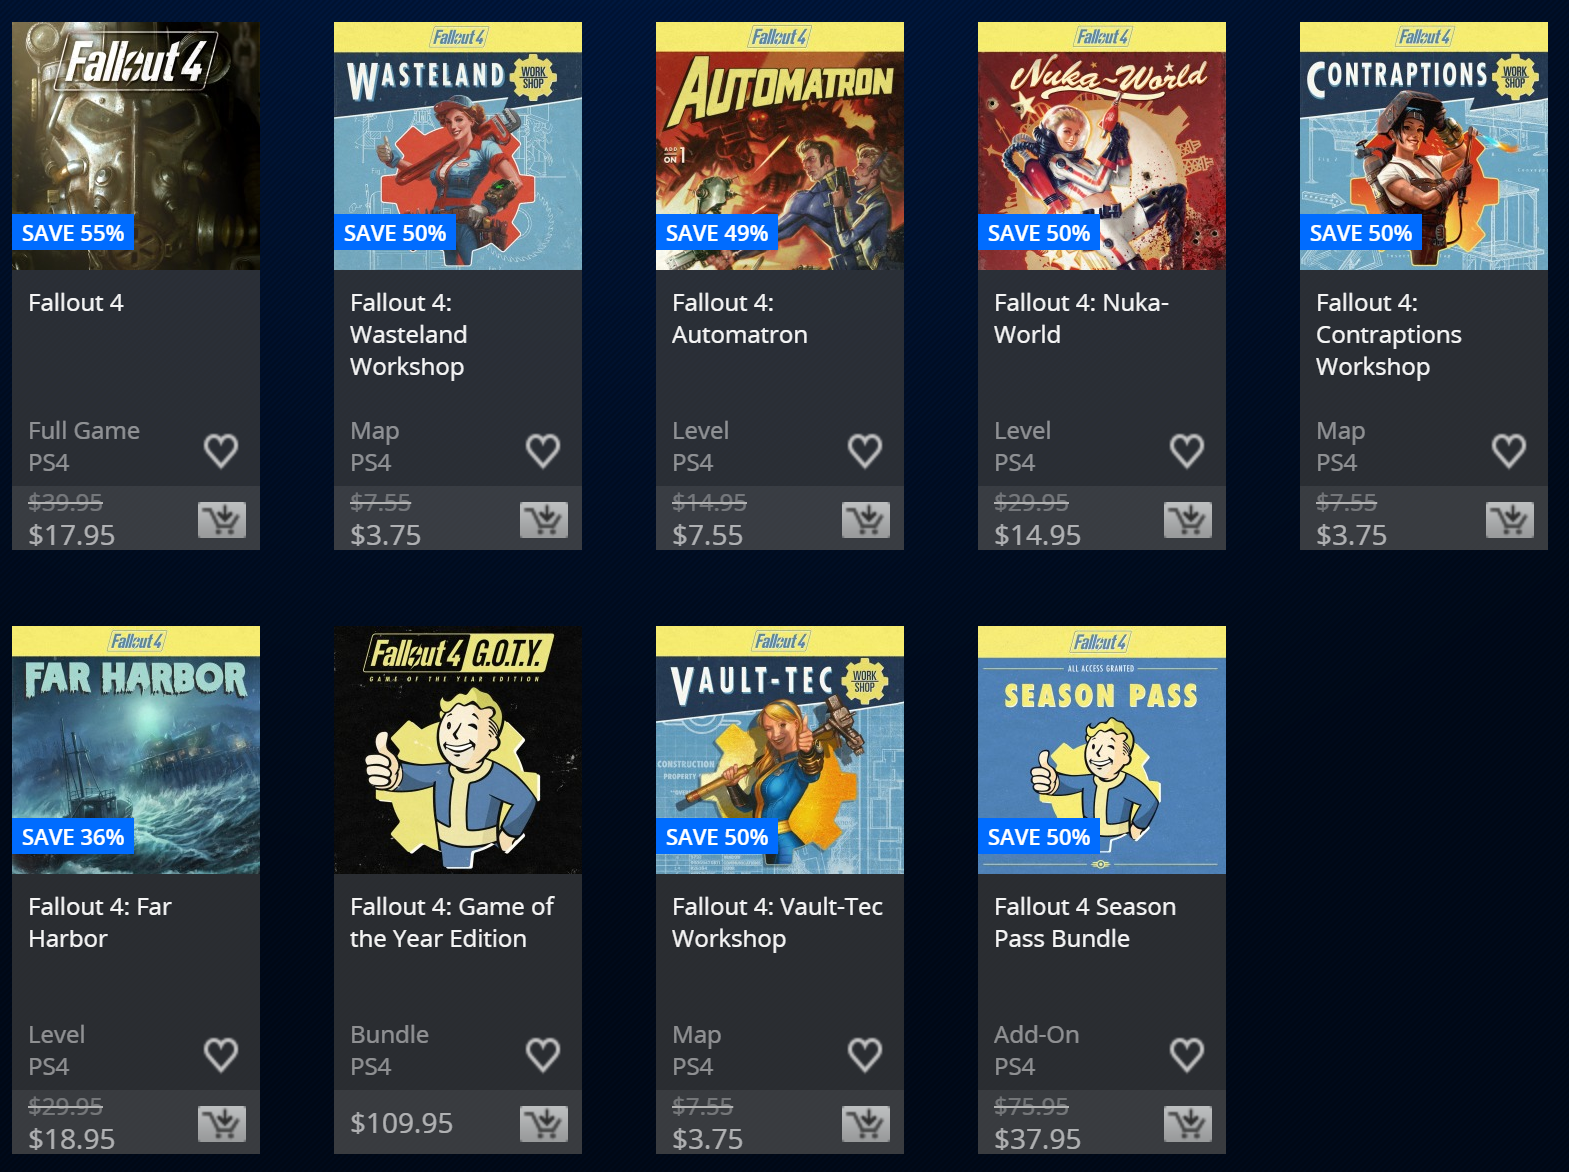 PlayStation Store Halloween Sale Fallout 4